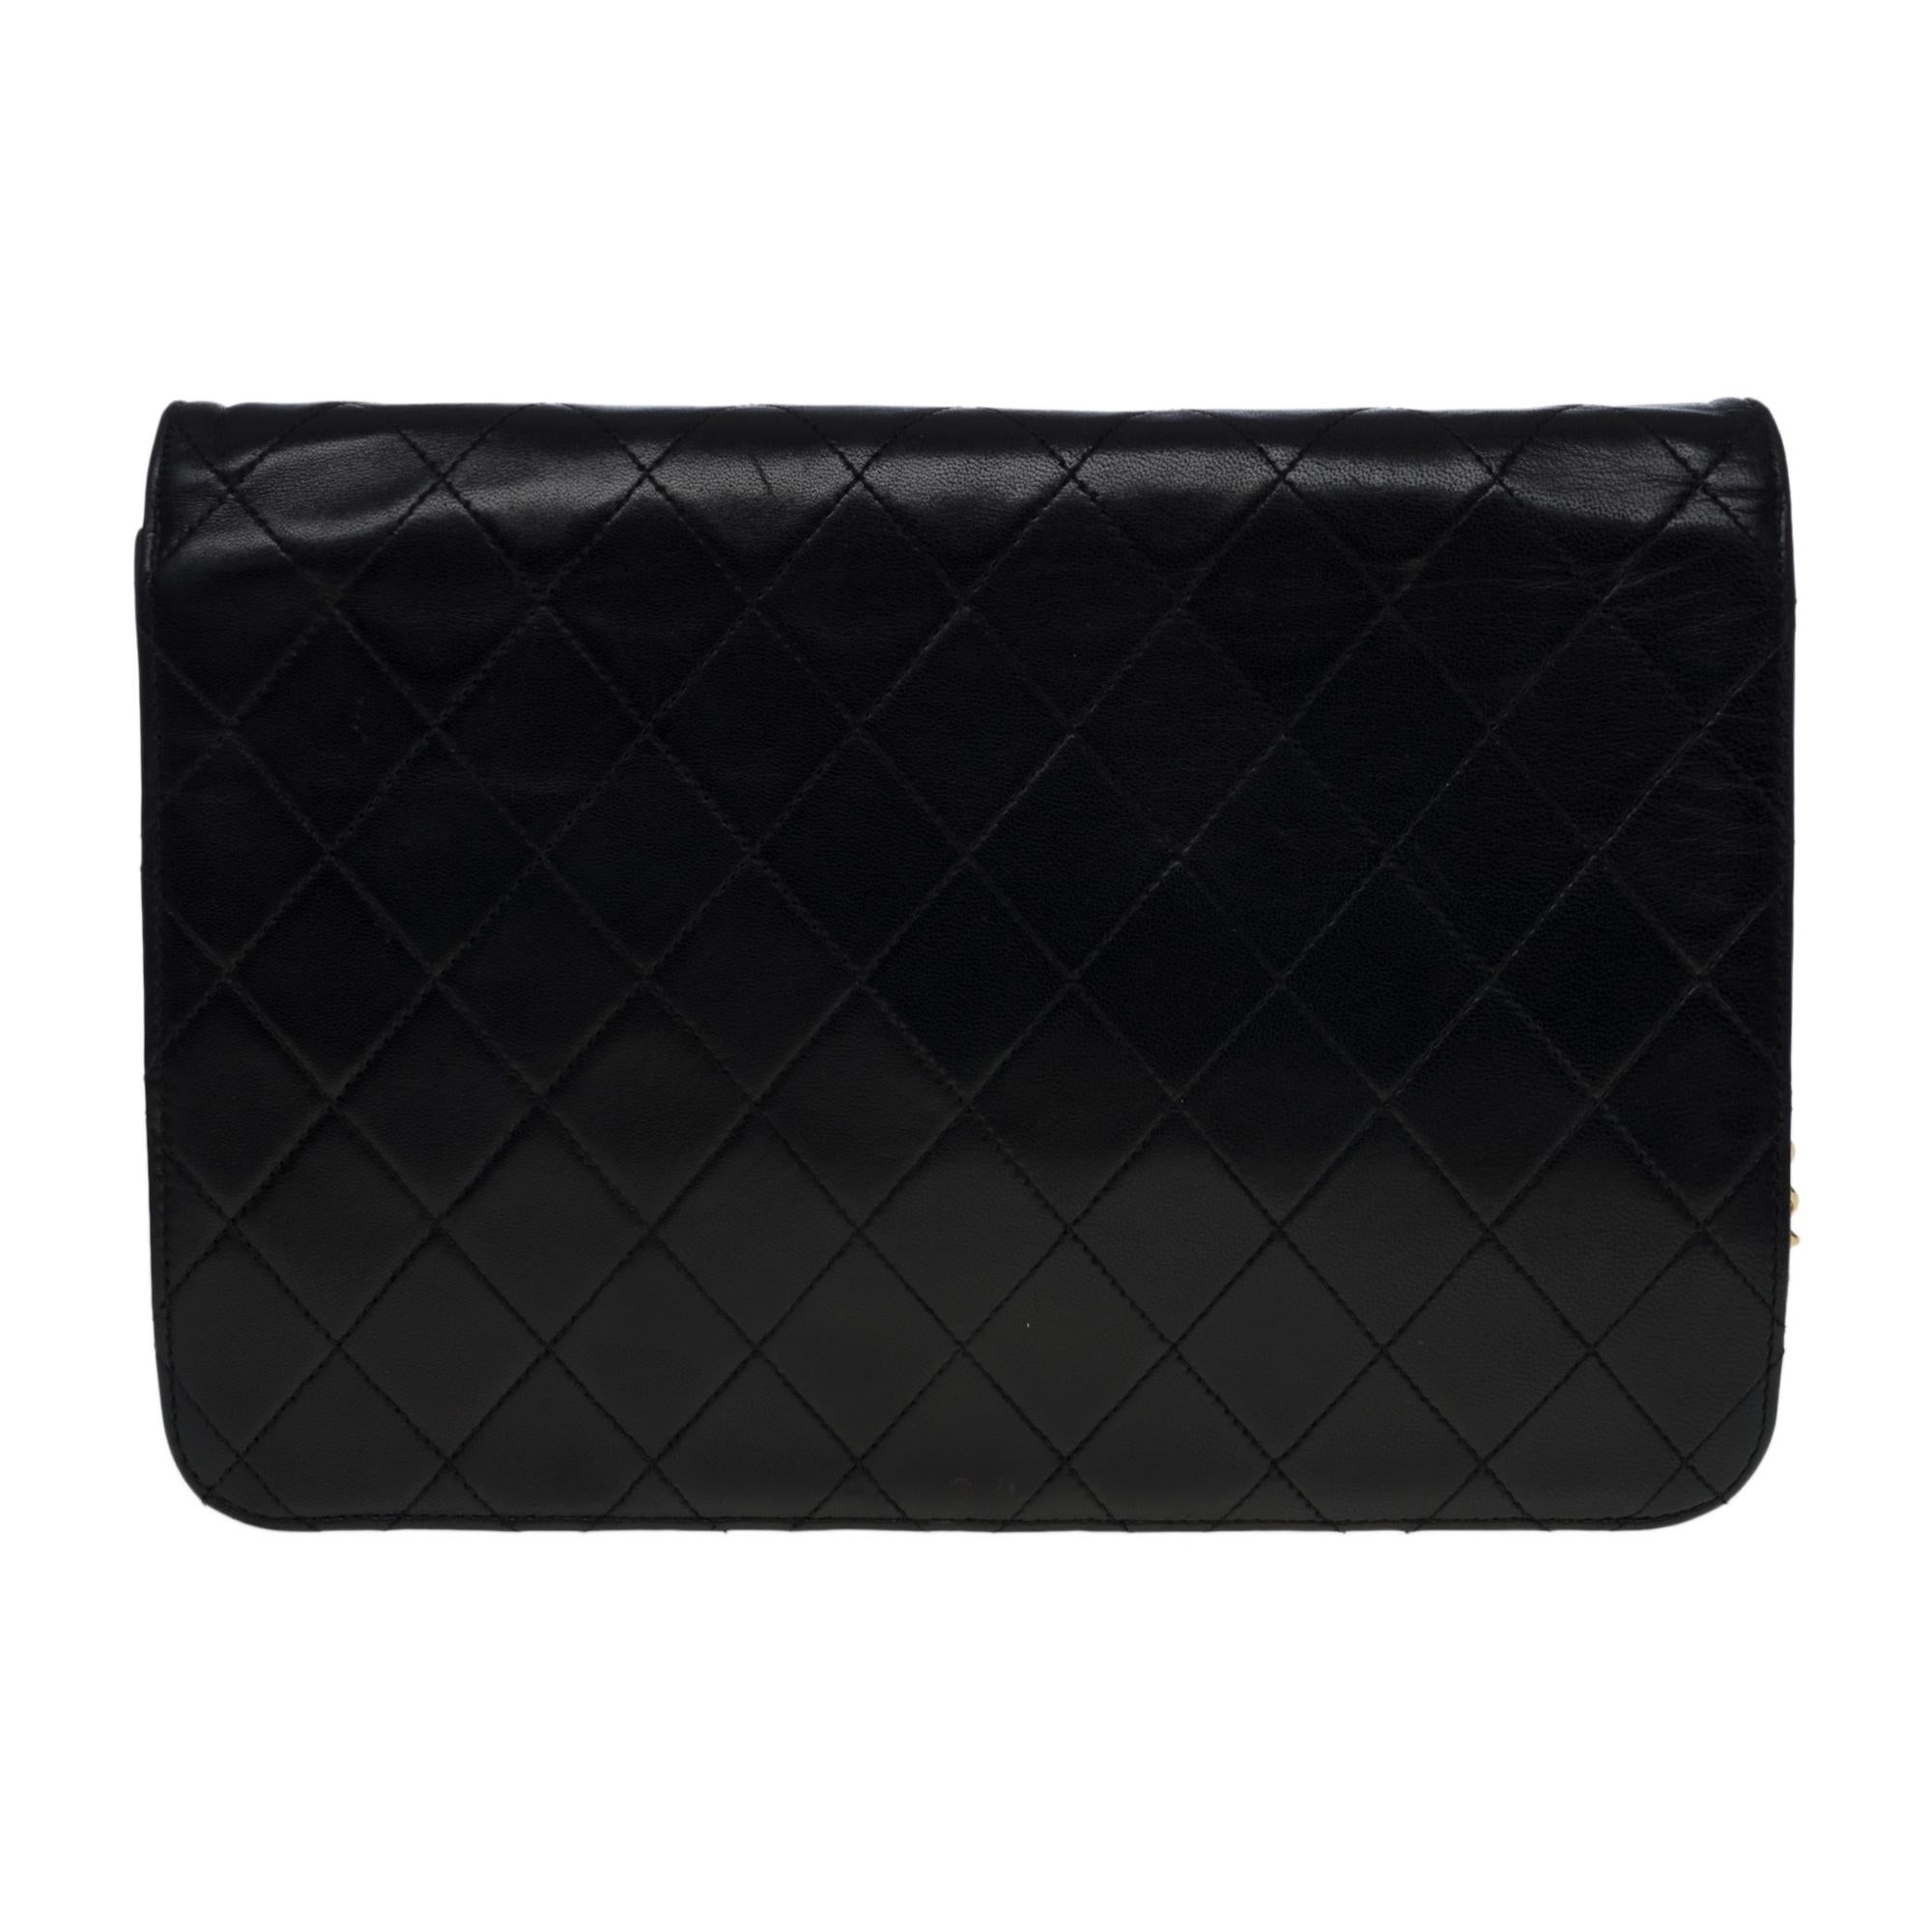 Beautiful​ ​Chanel​ ​Classic​ ​medium​ ​flap​ ​shoulder​ ​bag​ ​in​ ​black​ ​quilted​ ​lambskin​ ​leather,​ ​gold​ ​metal​ ​trim,​ ​a​ ​gold​ ​metal​ ​chain​ ​handle​ ​interlaced​ ​with​ ​black​ ​leather​ ​allowing​ ​a​ ​shoulder​ ​or​